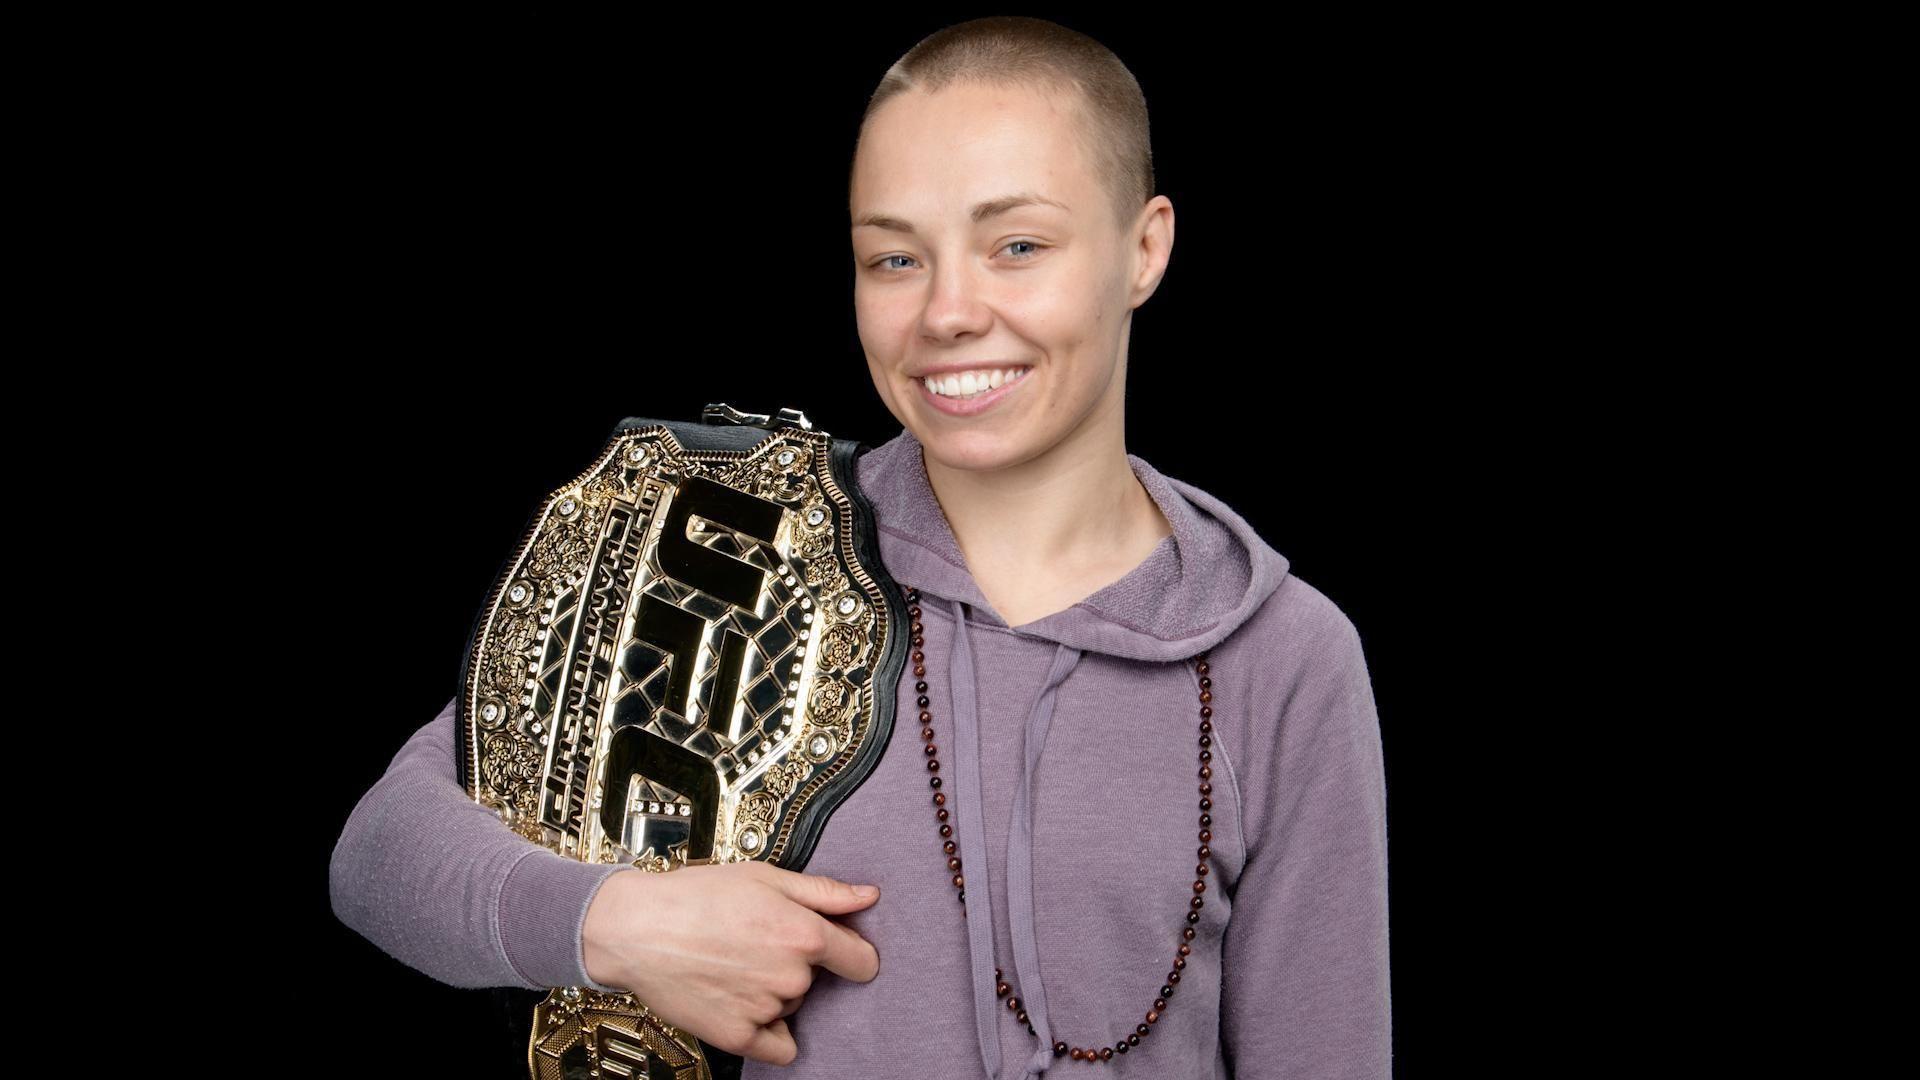 Rose Namajunas Drops By To Talk About Her UFC Career.